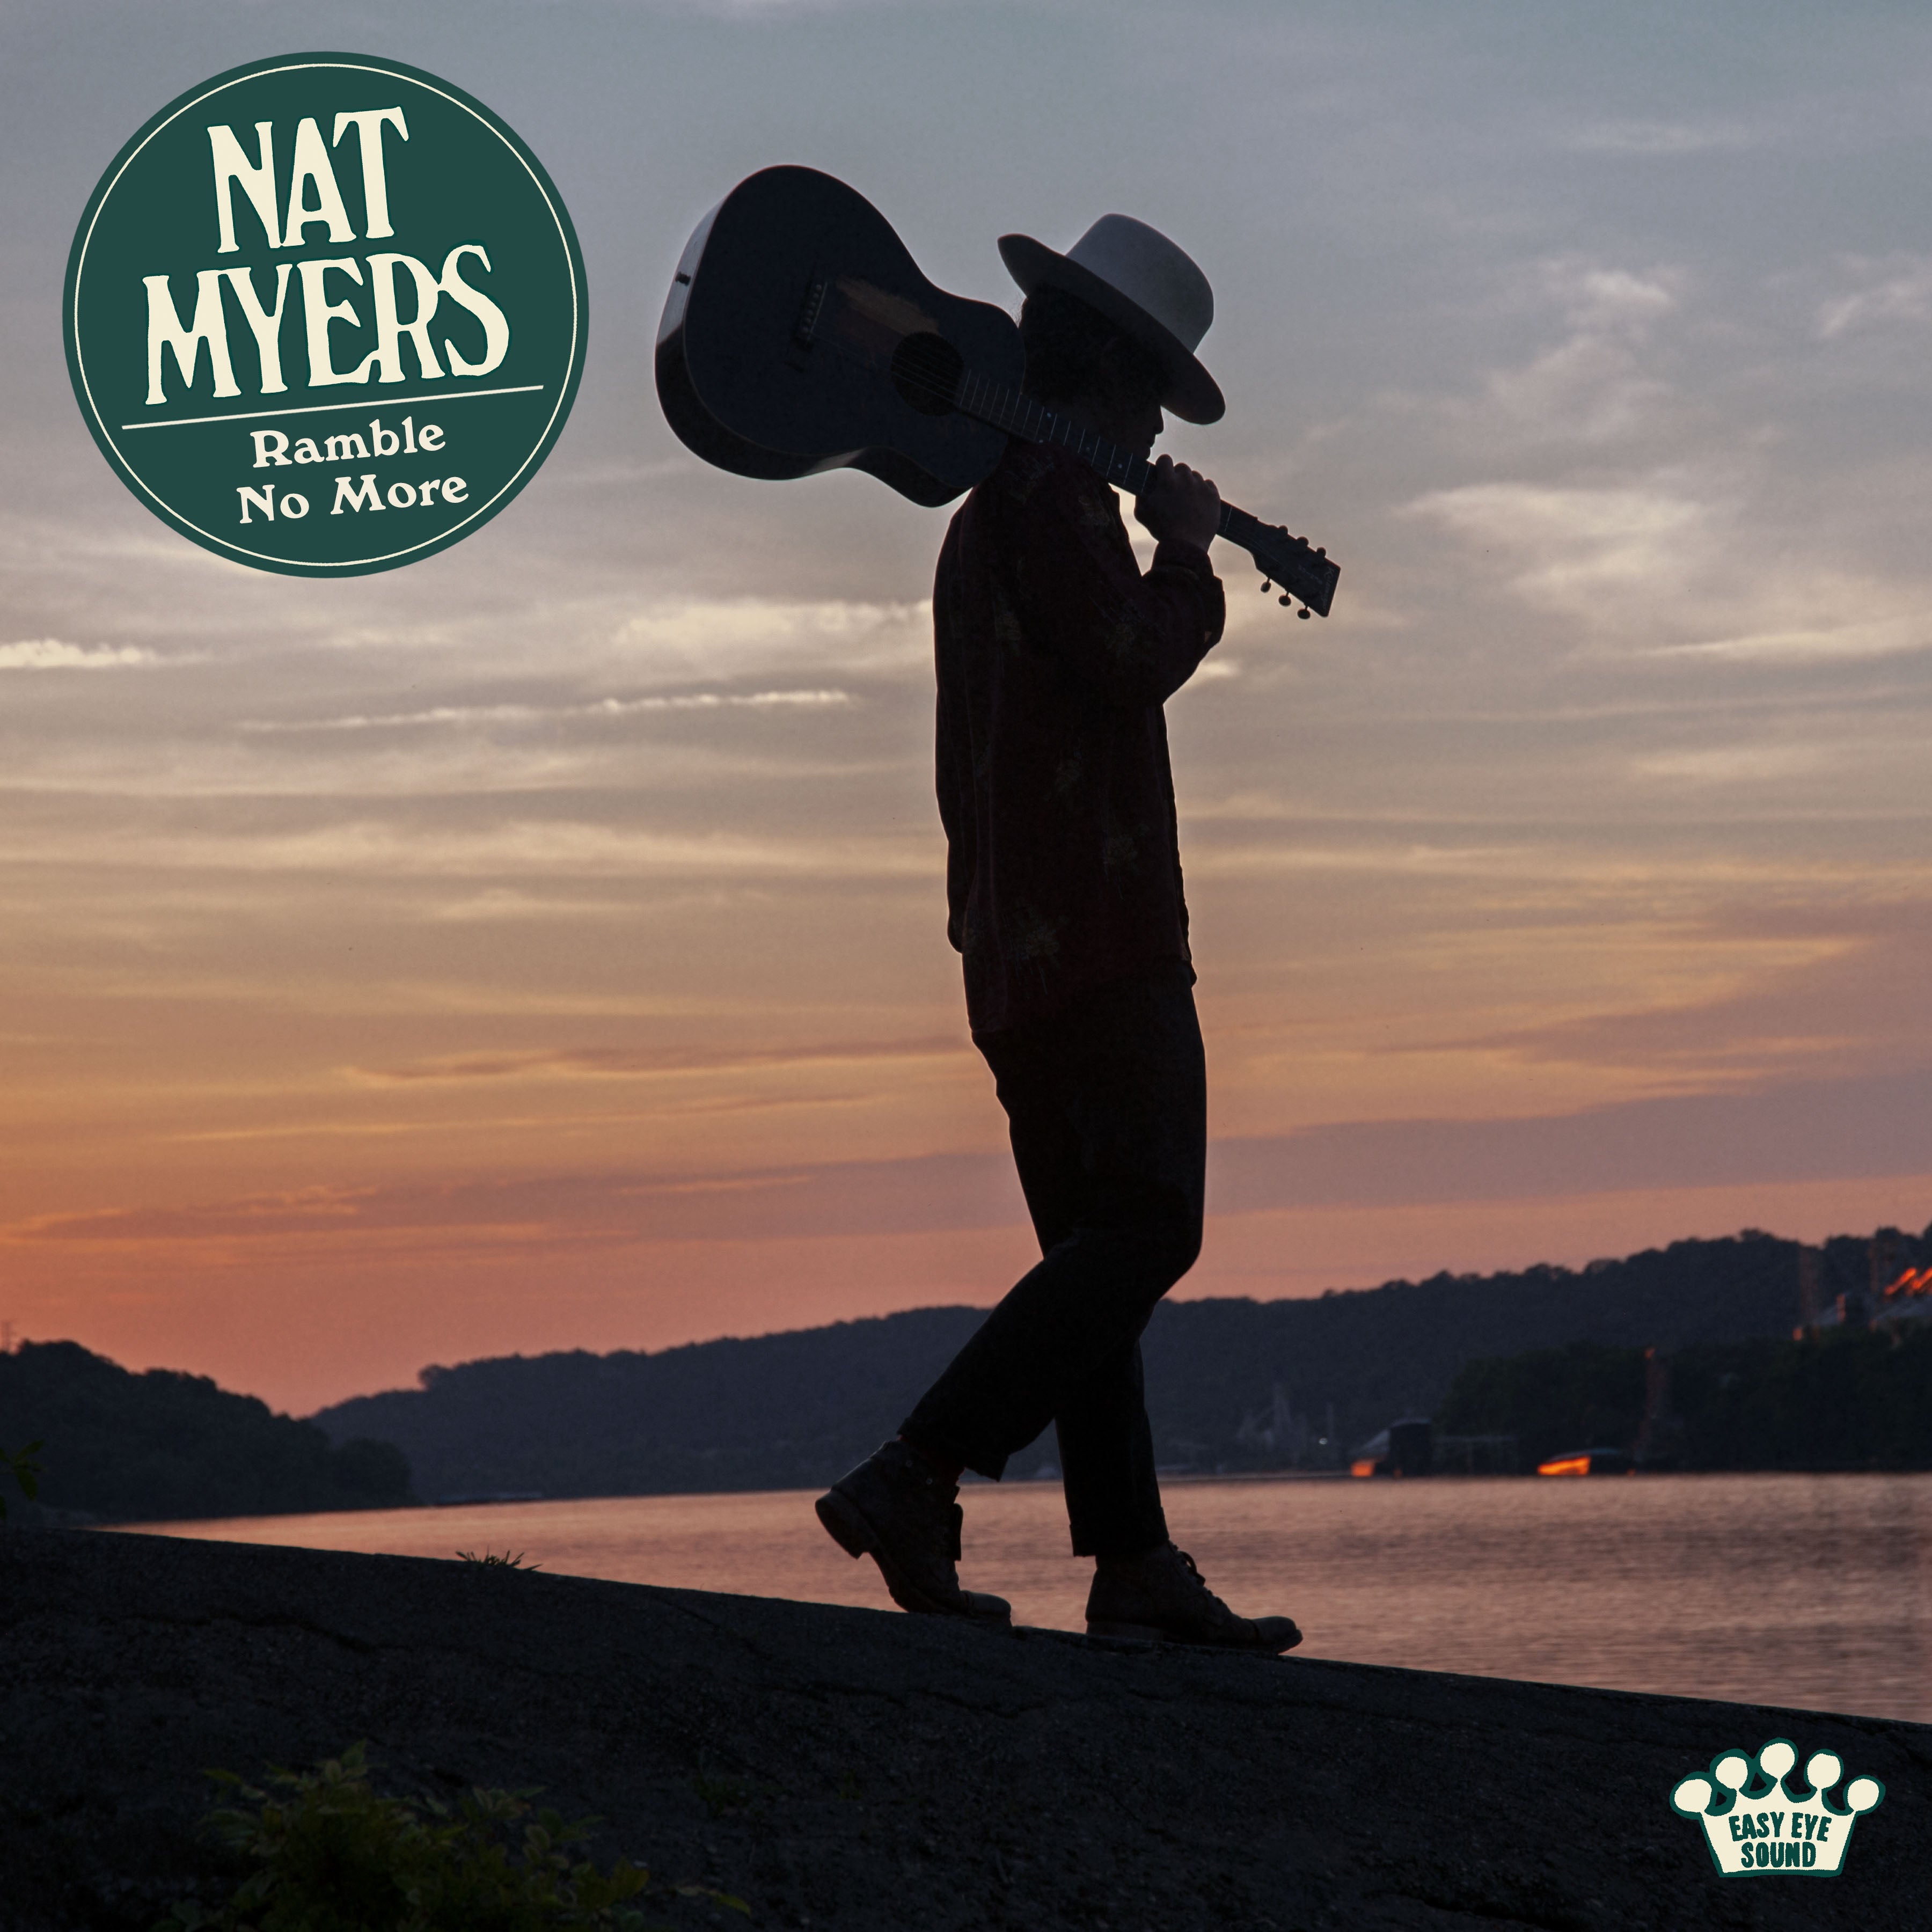 “RAMBLE NO MORE” BY NAT MYERS IS OUT NOW!